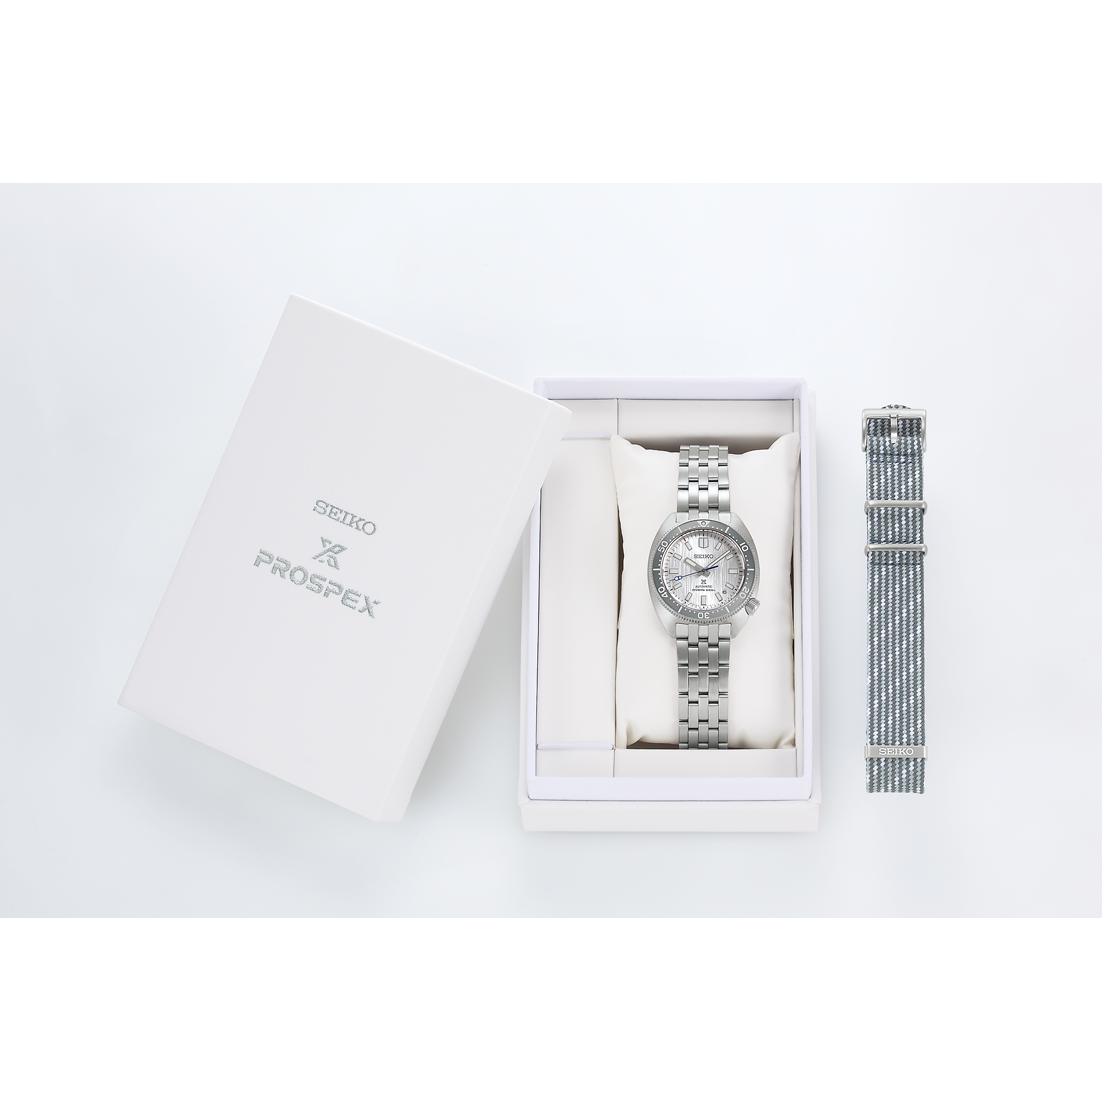 Seiko Prospex Watchmaking 110th Anniversary Save the Ocean Limited Edition Watch-SPB333